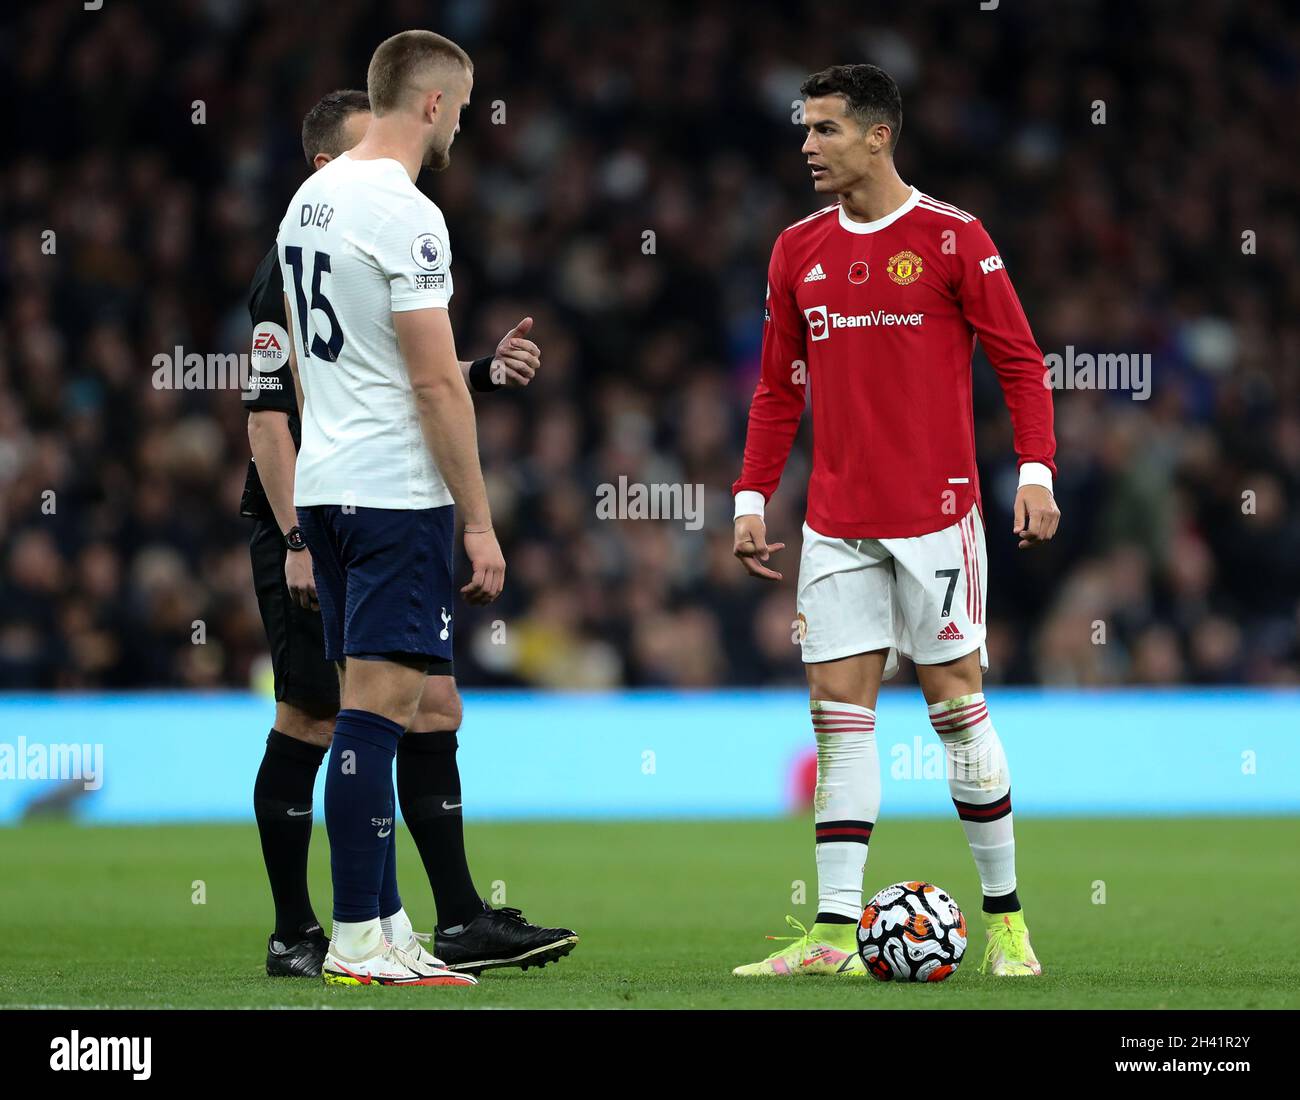 LONDON, ENGLAND - OCTOBER 30: Cristiano Ronaldo of Manchester United talks  to the referee after his goal was ruled out for offside during the Premier  League match between Tottenham Hotspur and Manchester